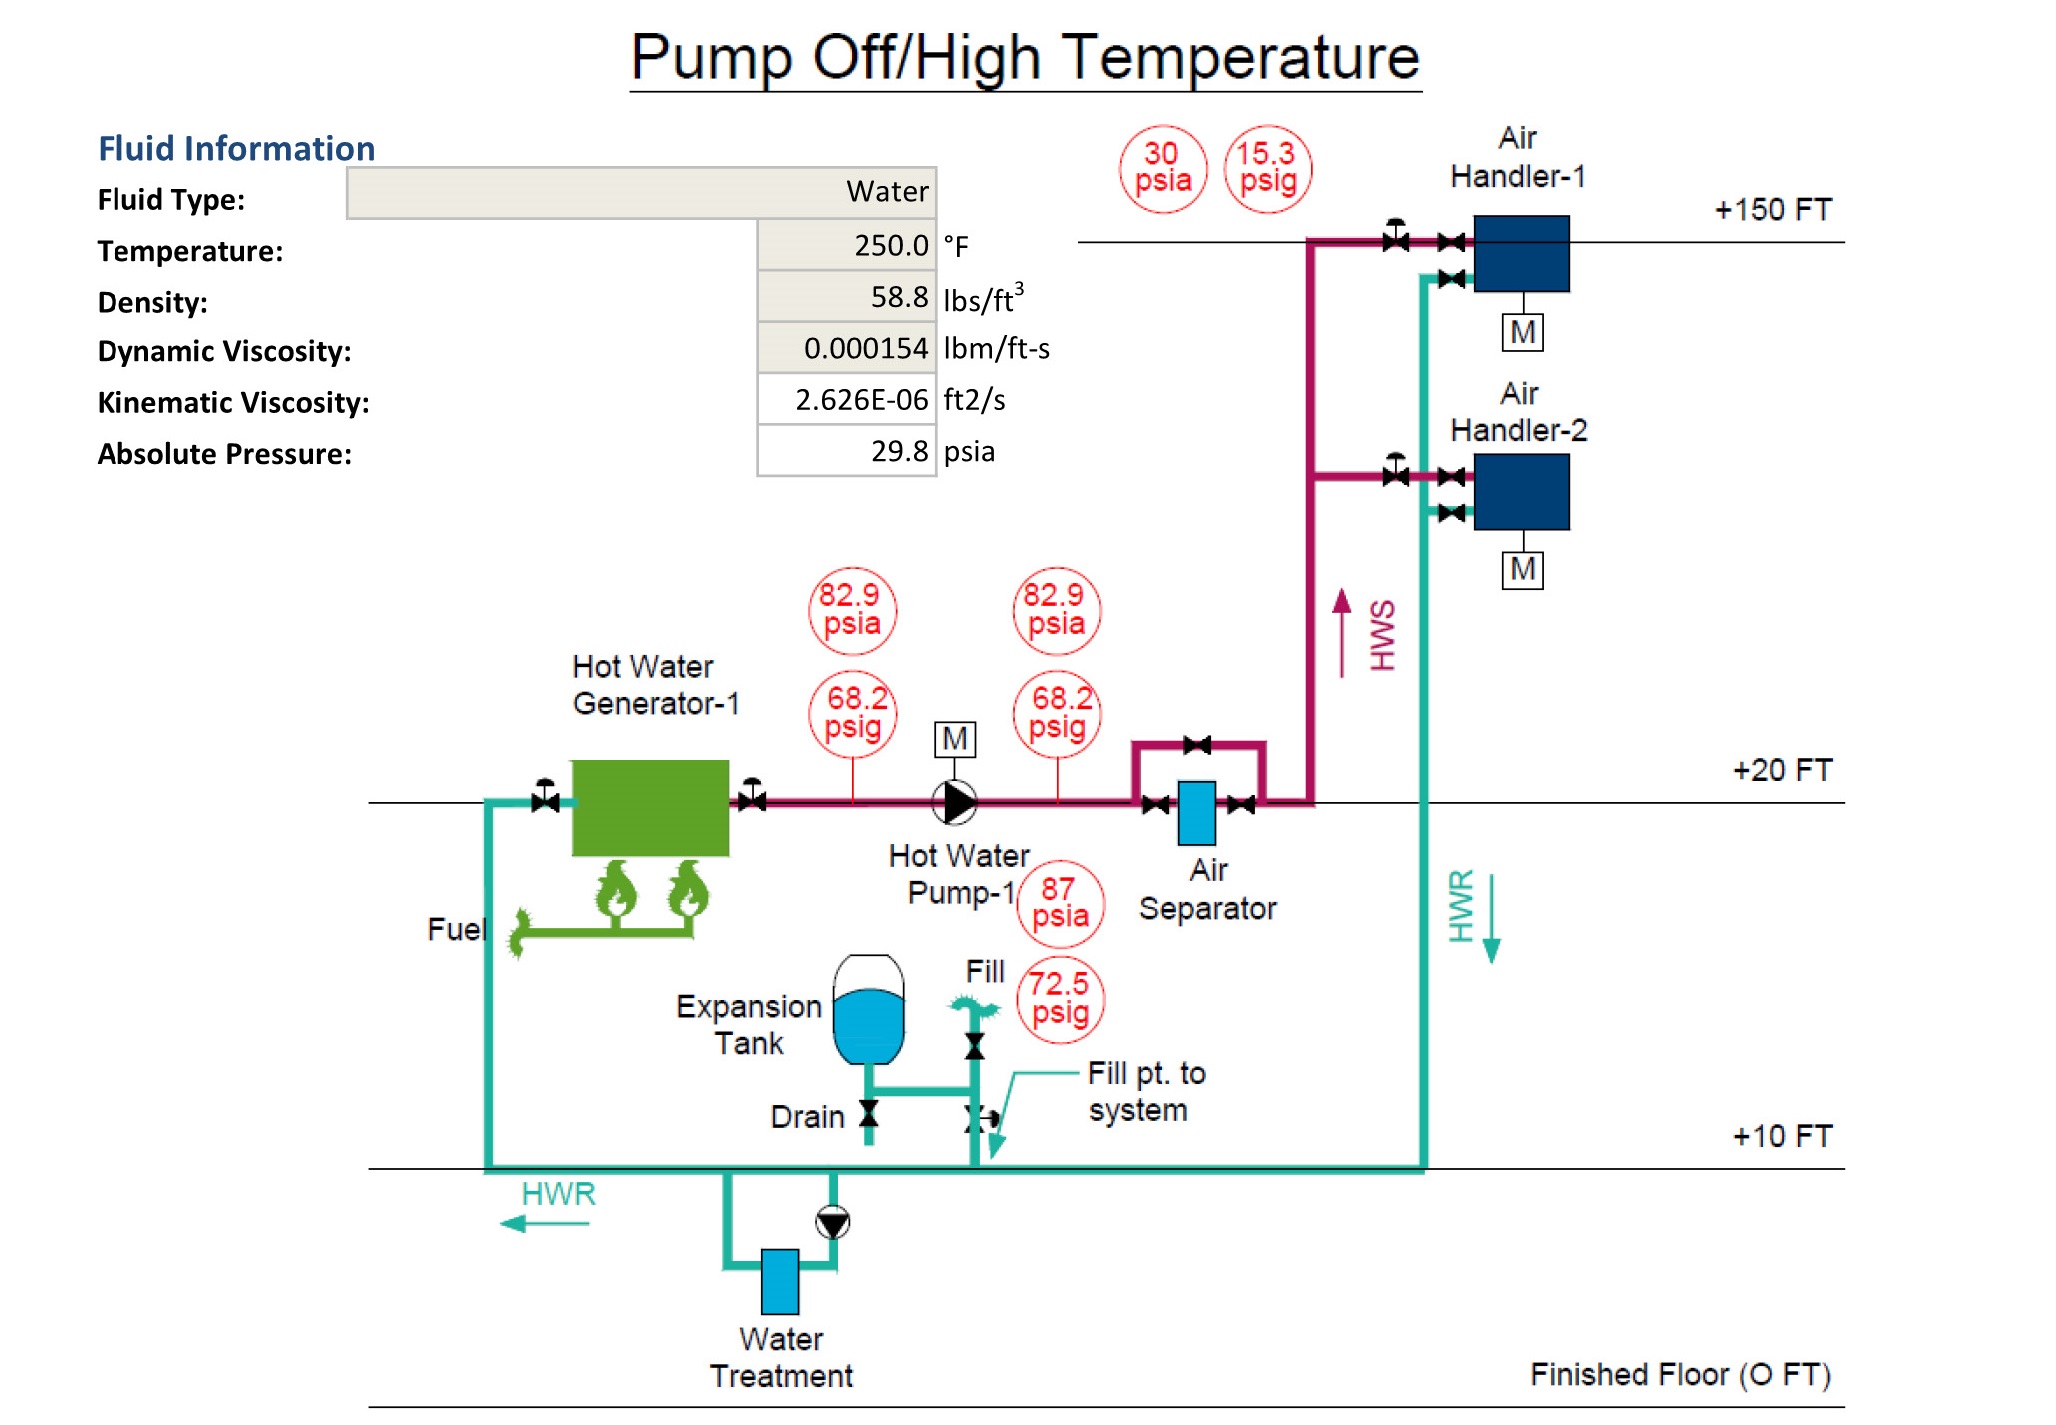 Hydronic Hot Water Diagram with an expansion tank with the pump on and the system at maximum temperature of 250 F